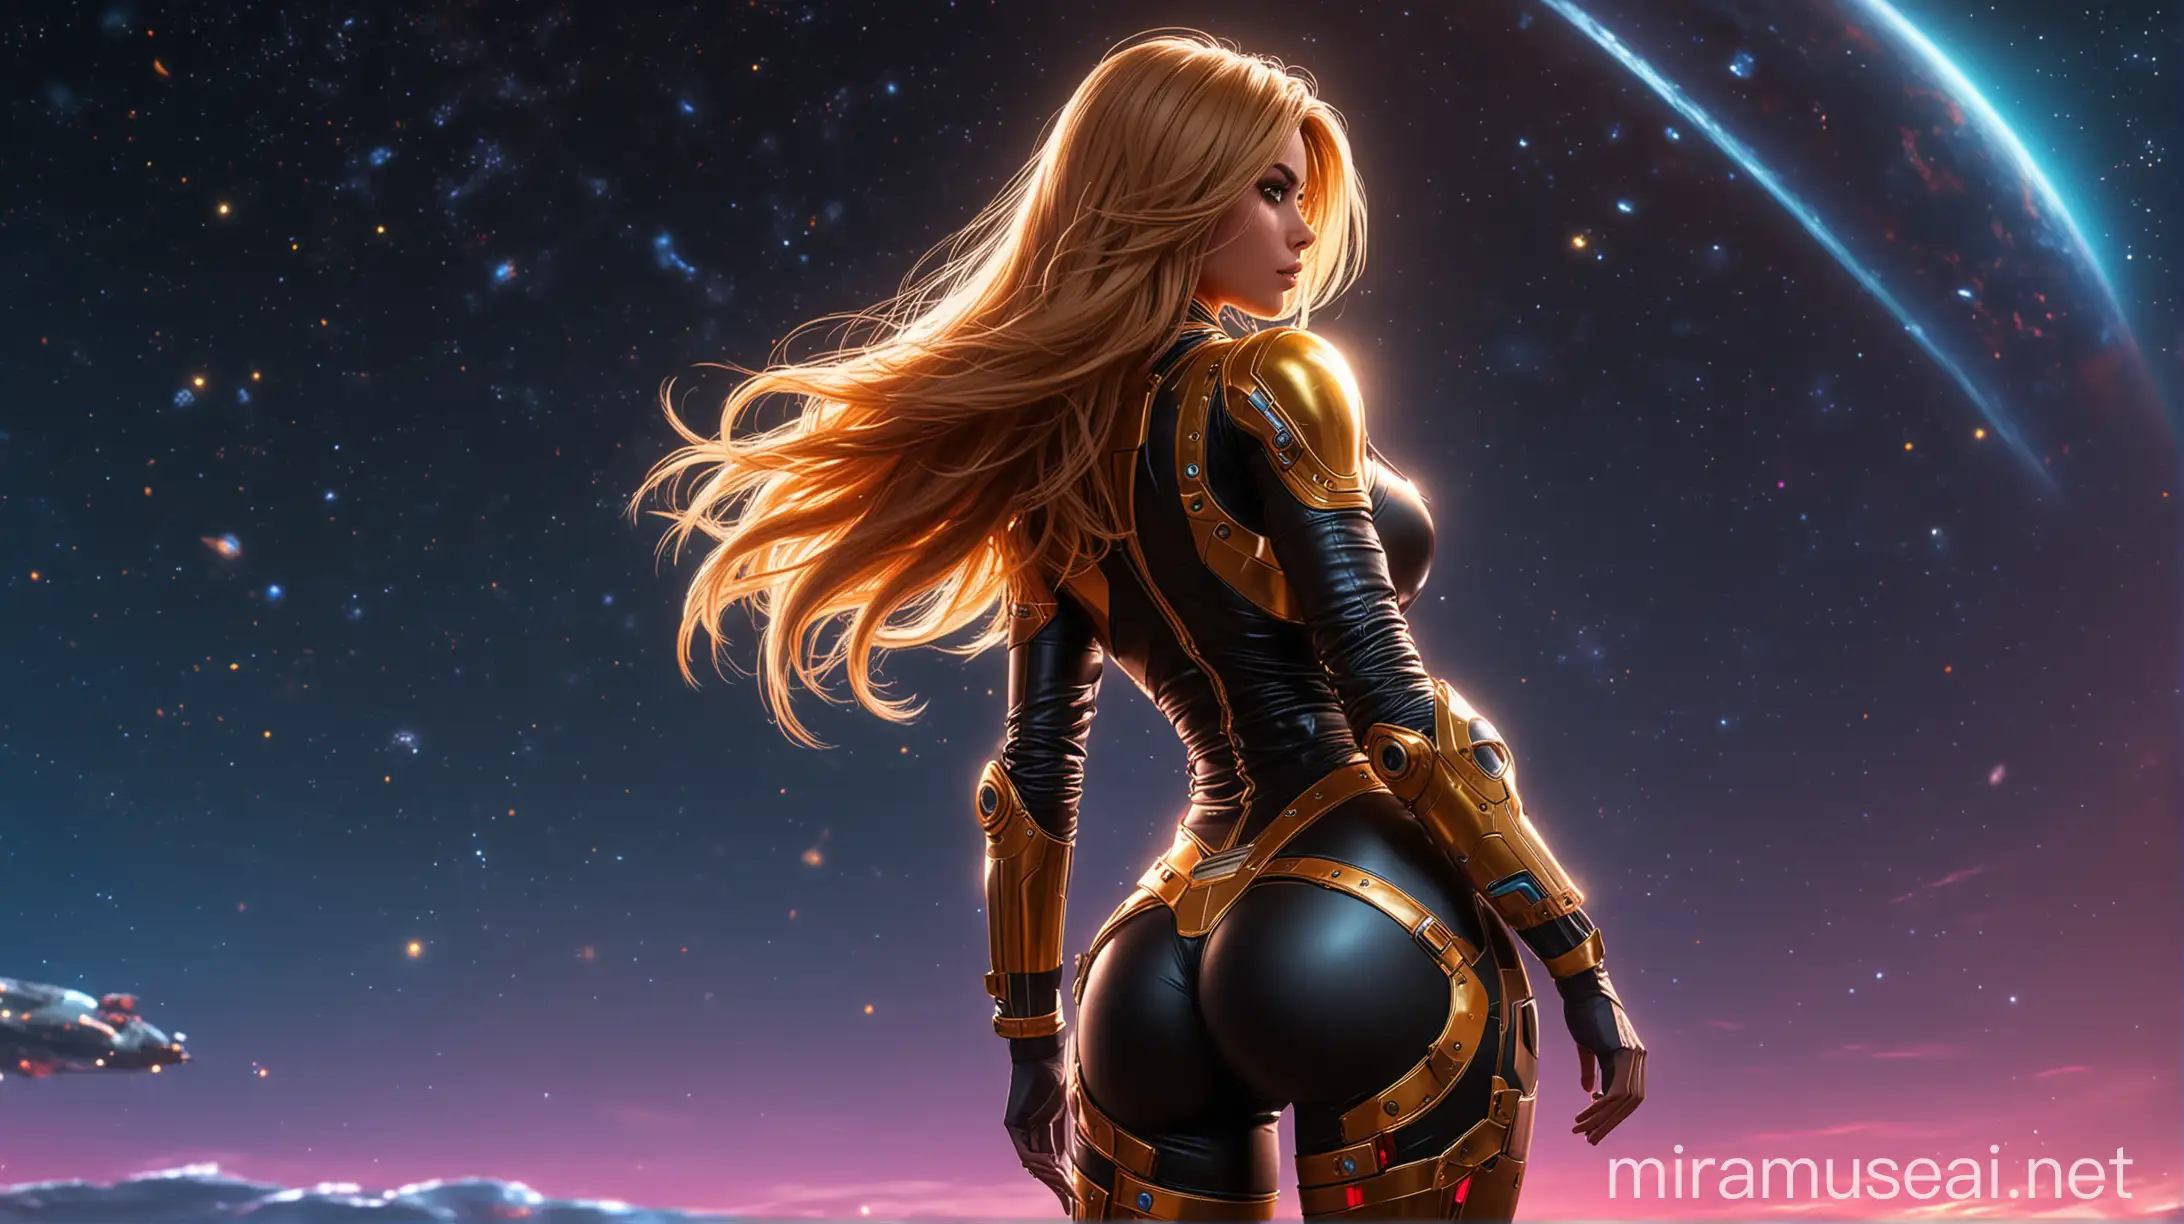 cartoon style, finess model girl, looking in the sky, seductive heroic pose from behind, sexy round ass, wild long modern hair style, tight heavily armored spacesuit, black and gold spacesuit, colorful neon glowing spacesuit, belt with pouches, colorful night sky, giant sci-fi spaceship